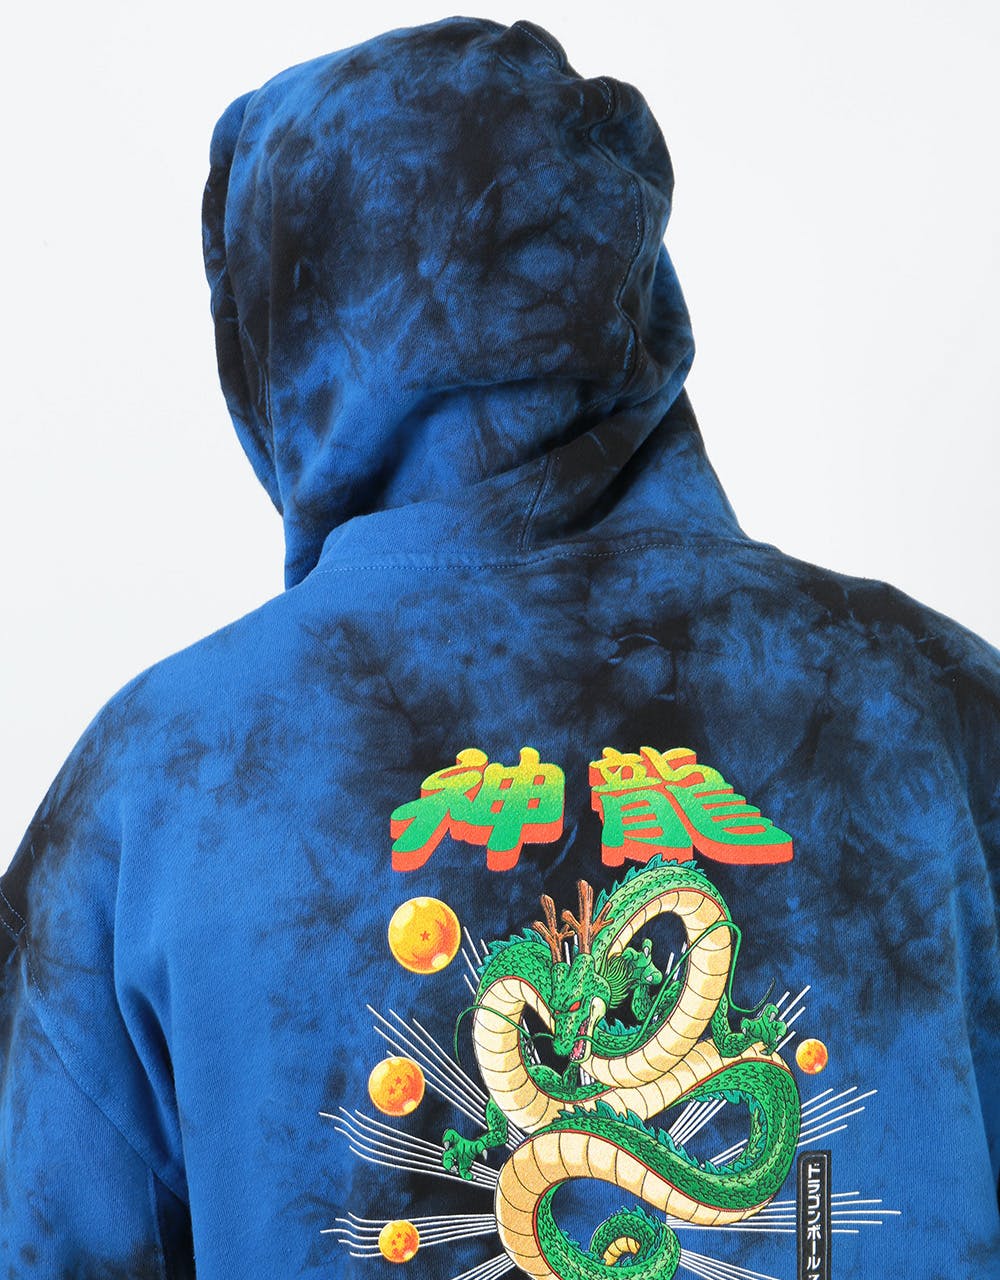 Primitive x Dragon Ball Z Shenron Wish Washed Pullover Hoodie - Navy W